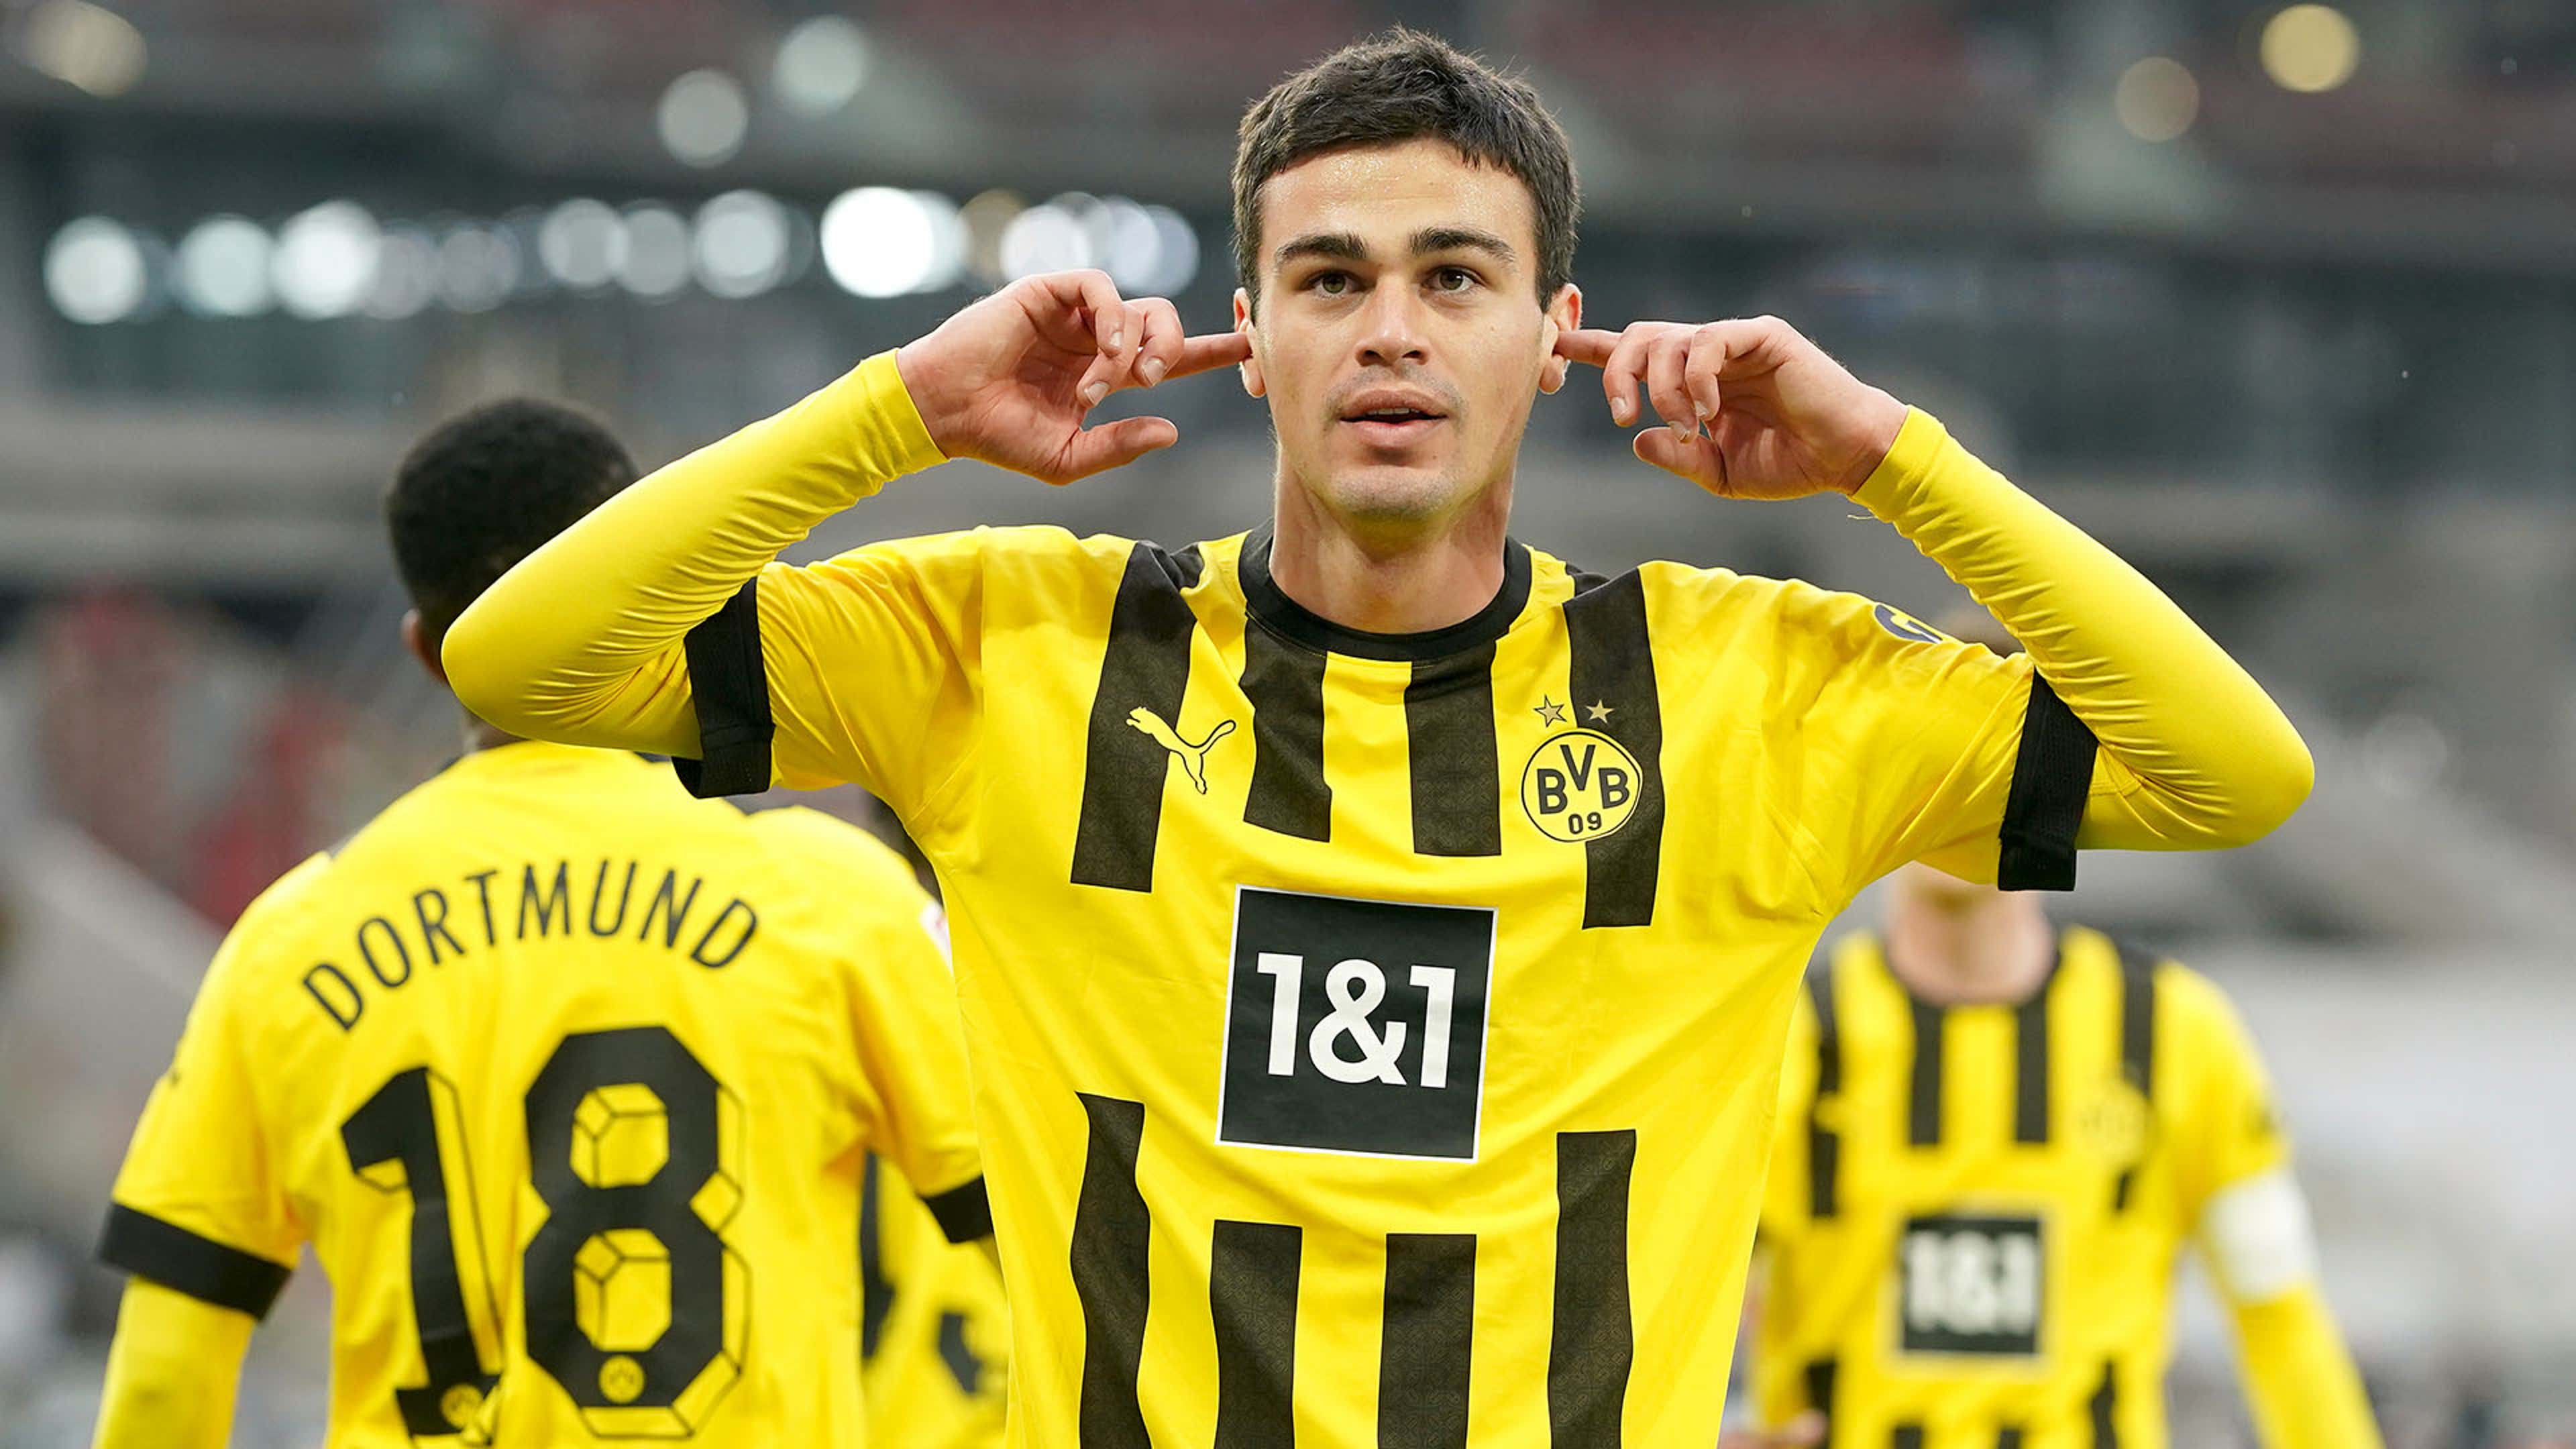 Gio Reyna travels! American is on the plane to Paris as Borussia Dortmund take on Paris Saint-Germain in the UCL | Goal.com